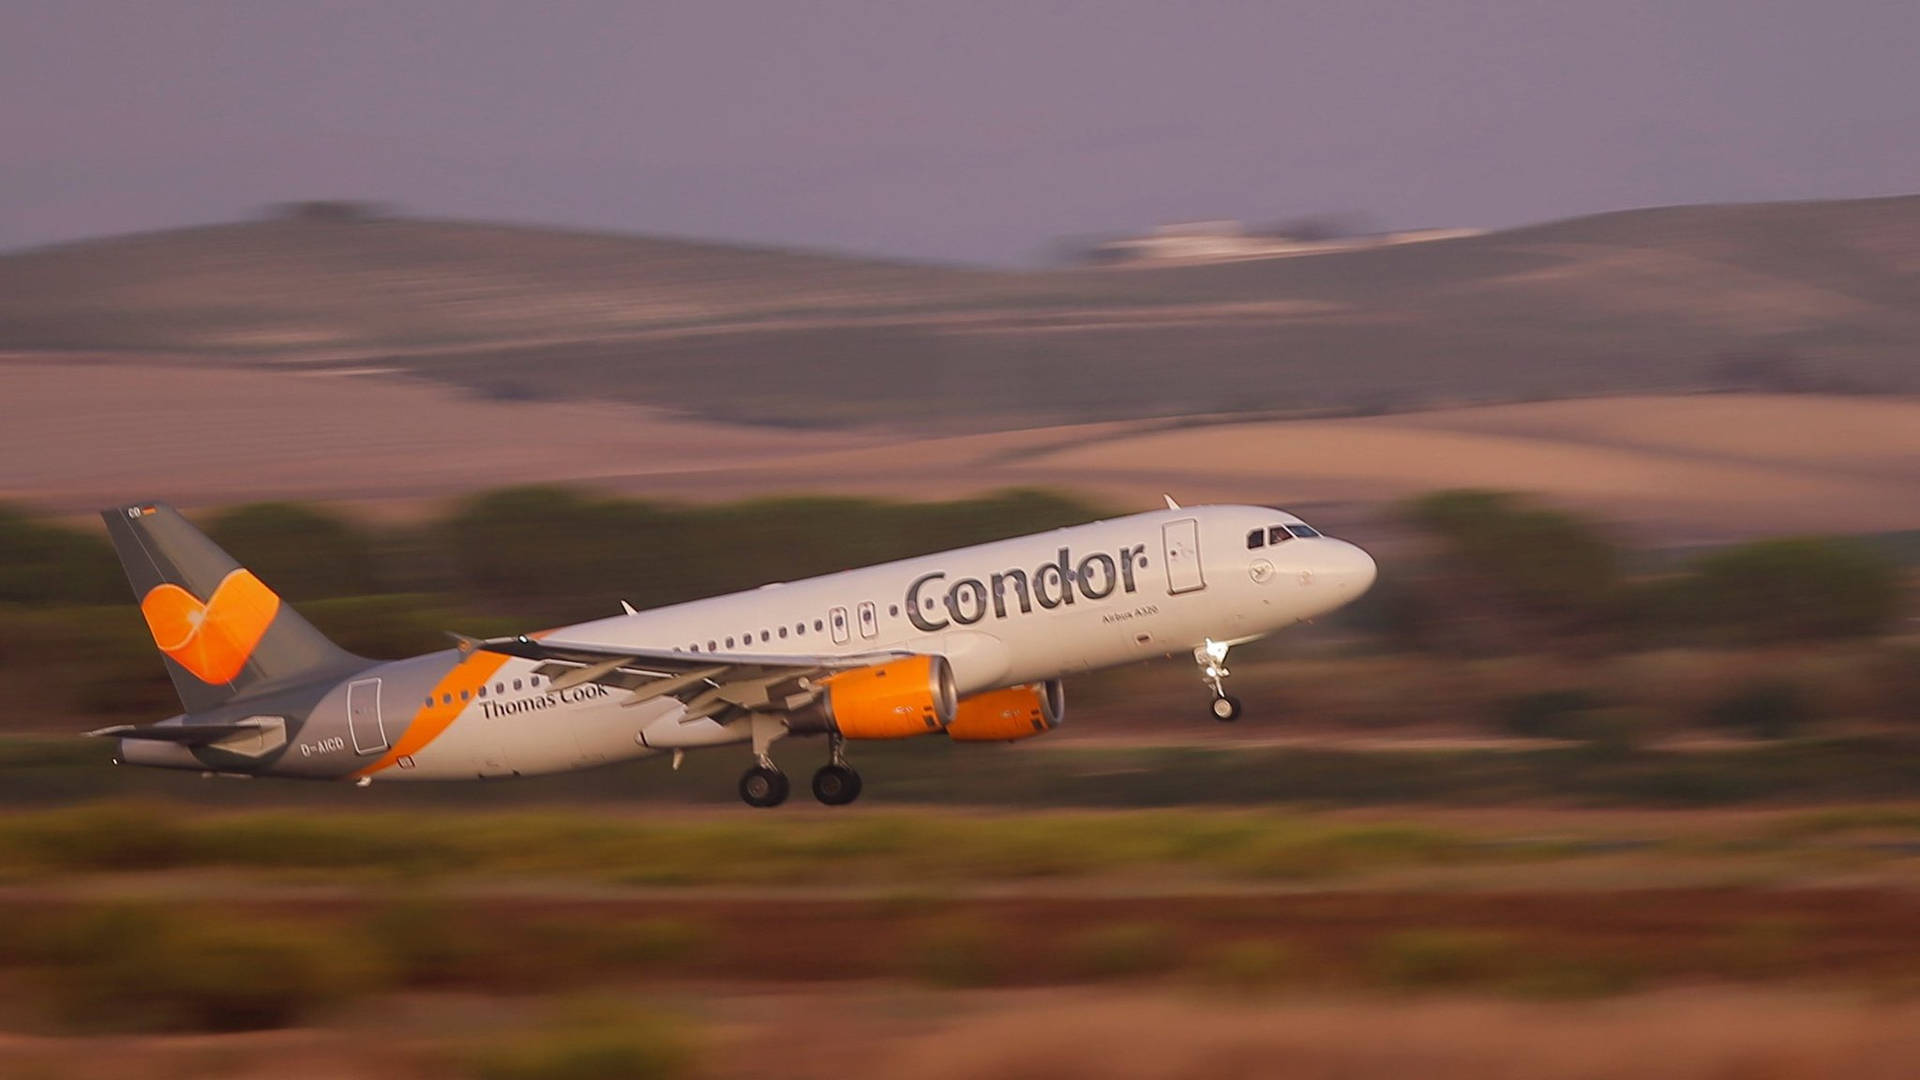 Condor Airlines Plane Ascends to the Skies Wallpaper